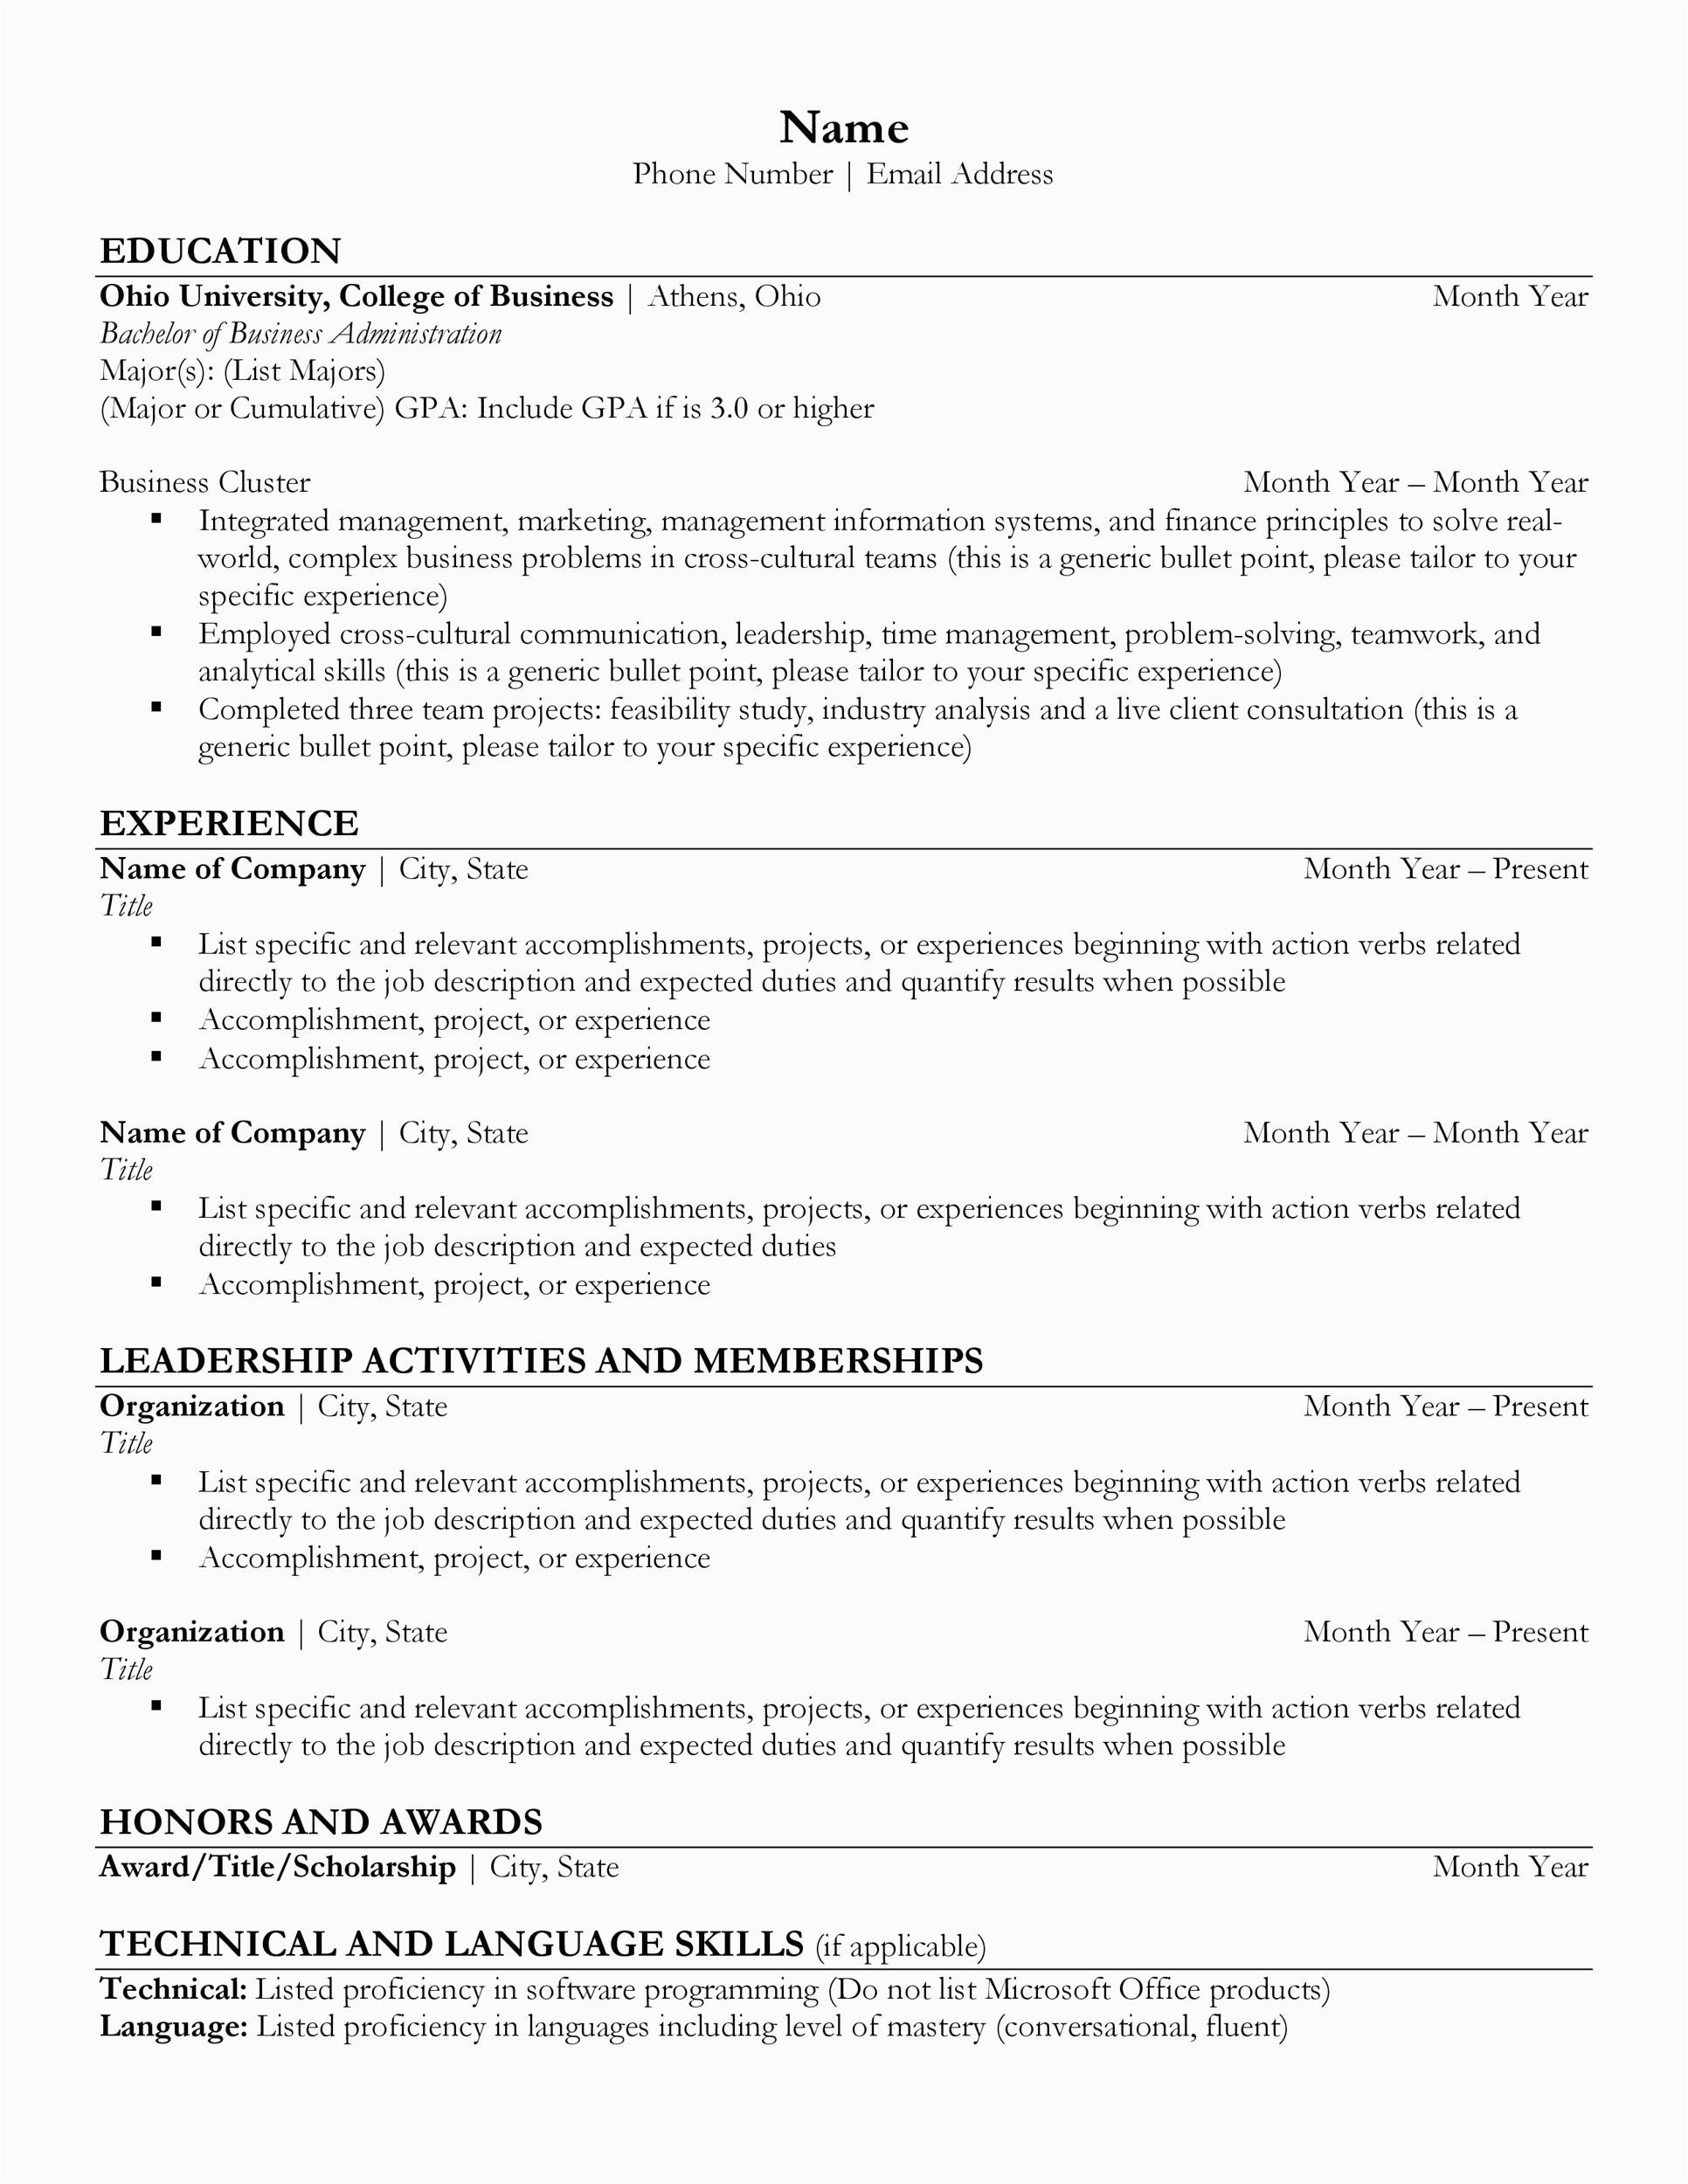 Resume Samples for College Students Application Undergraduate Students Sample Resume for University Application